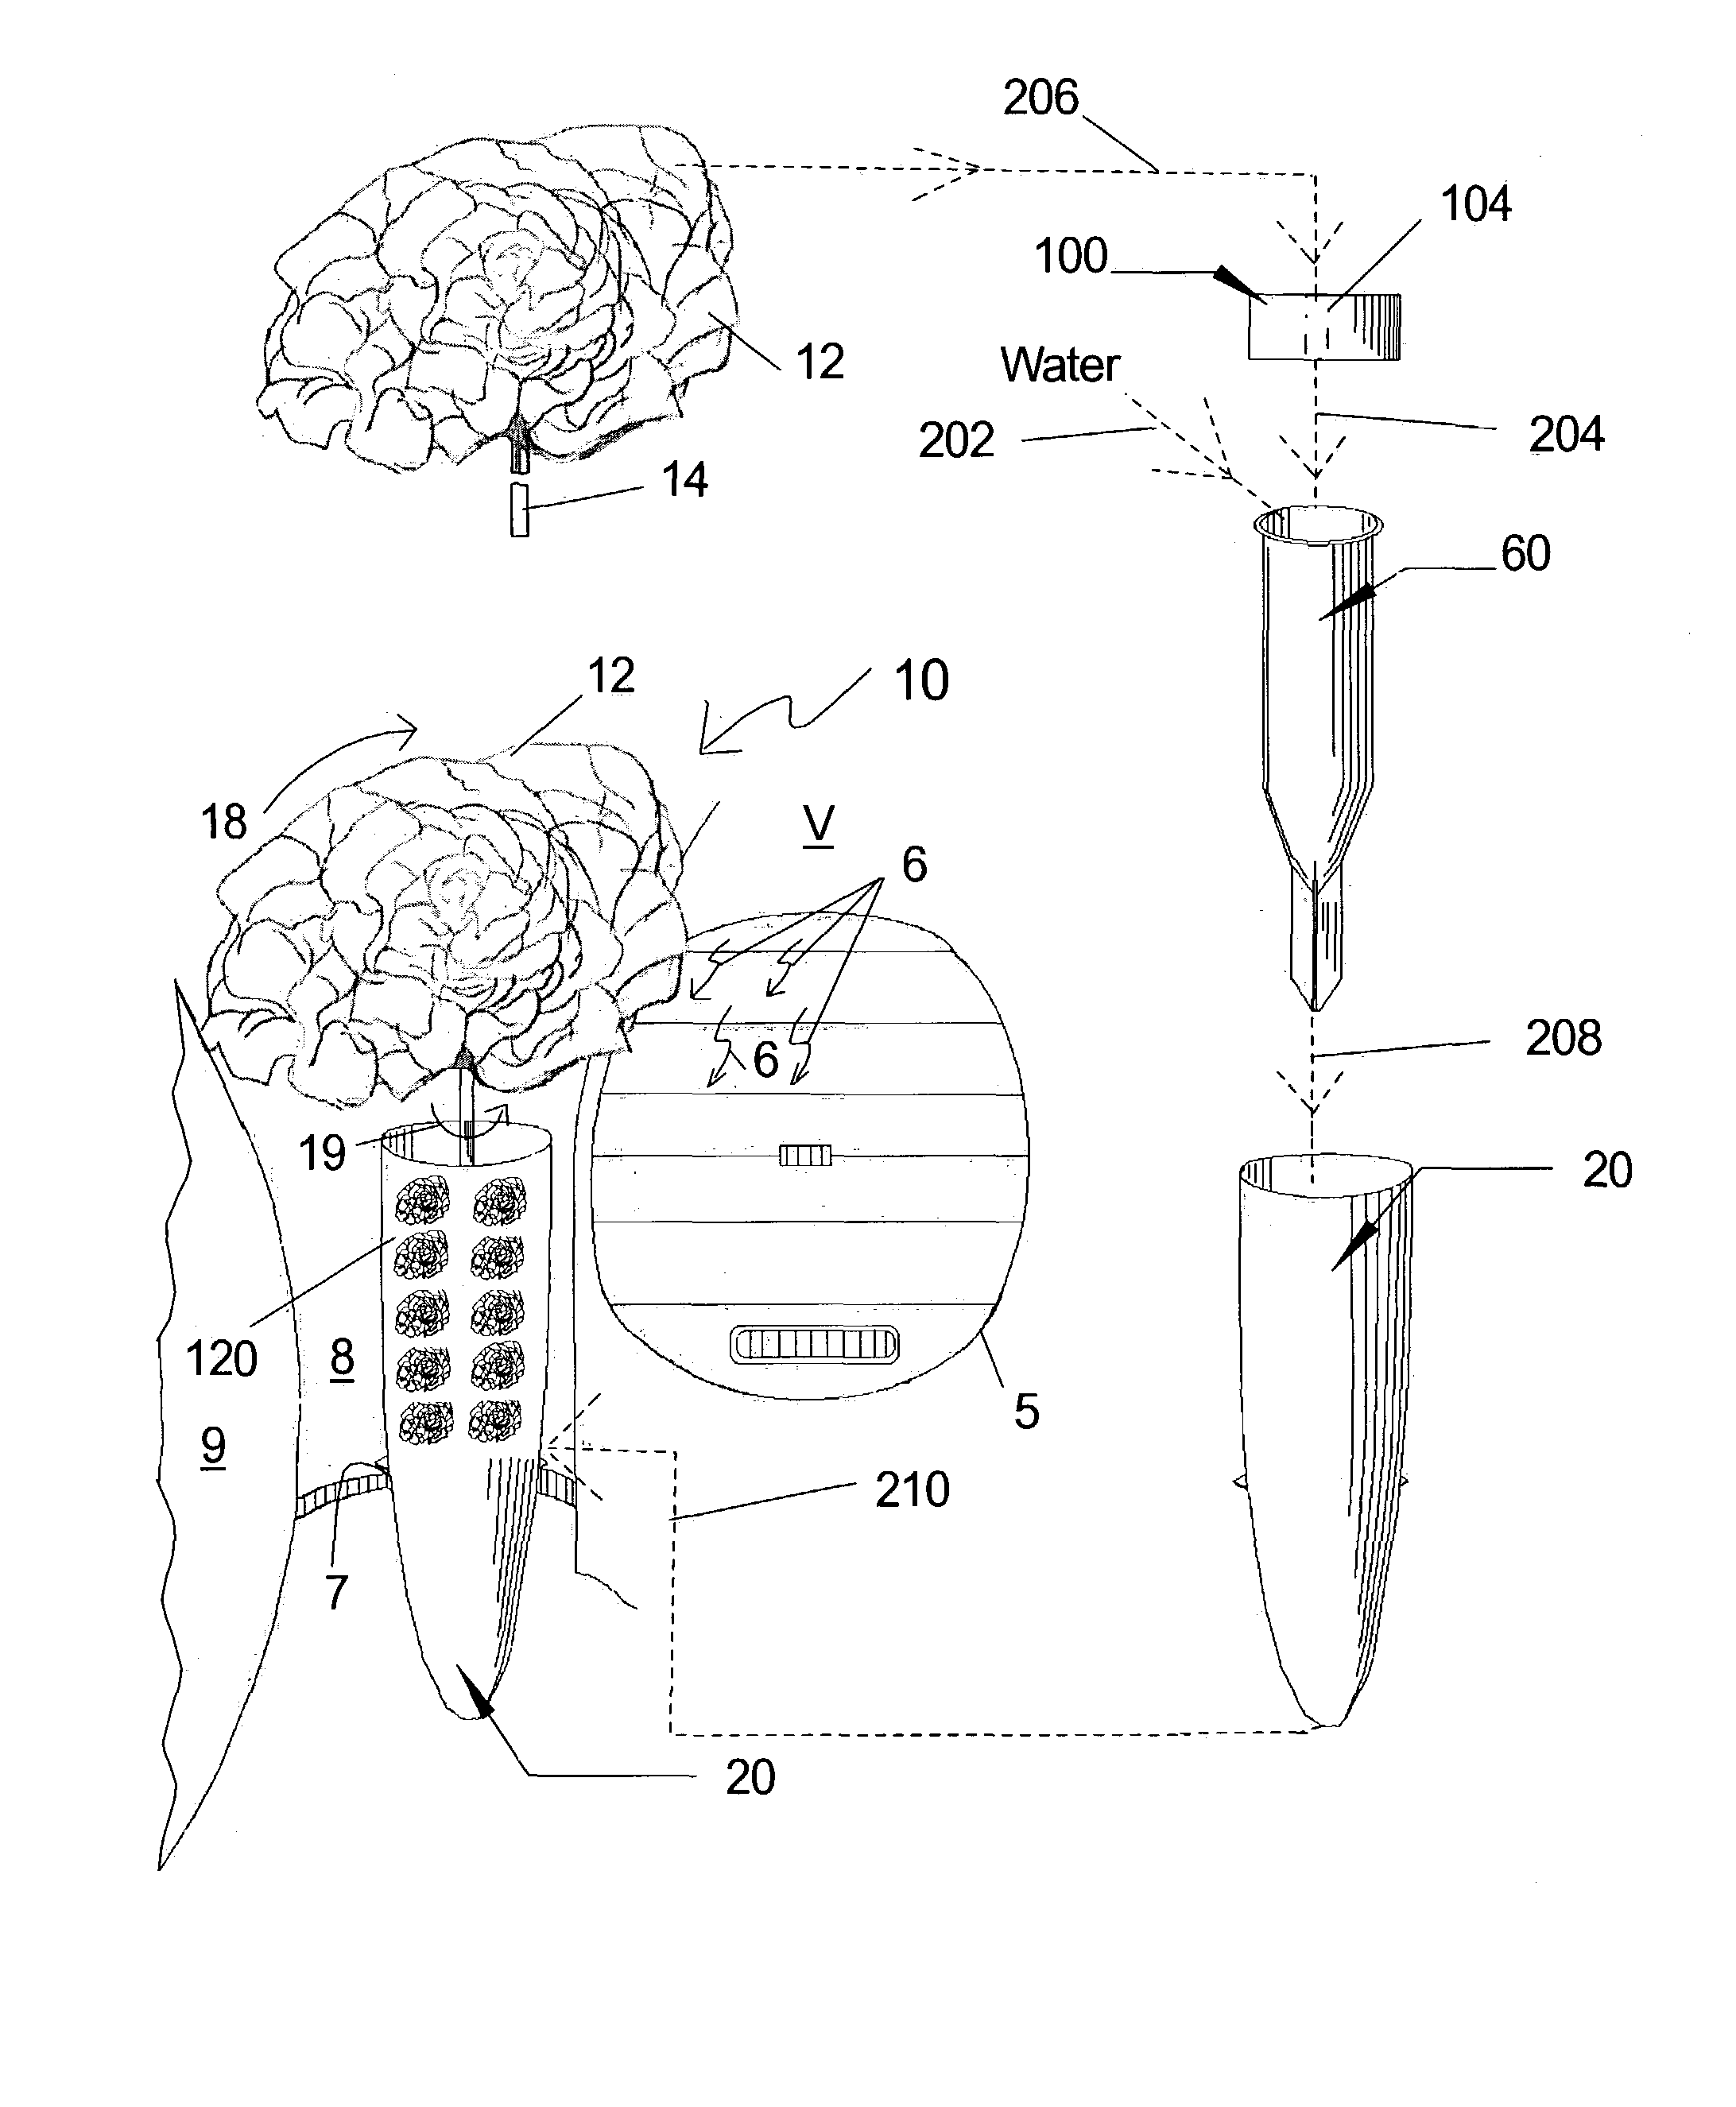 Spinning vase device and method